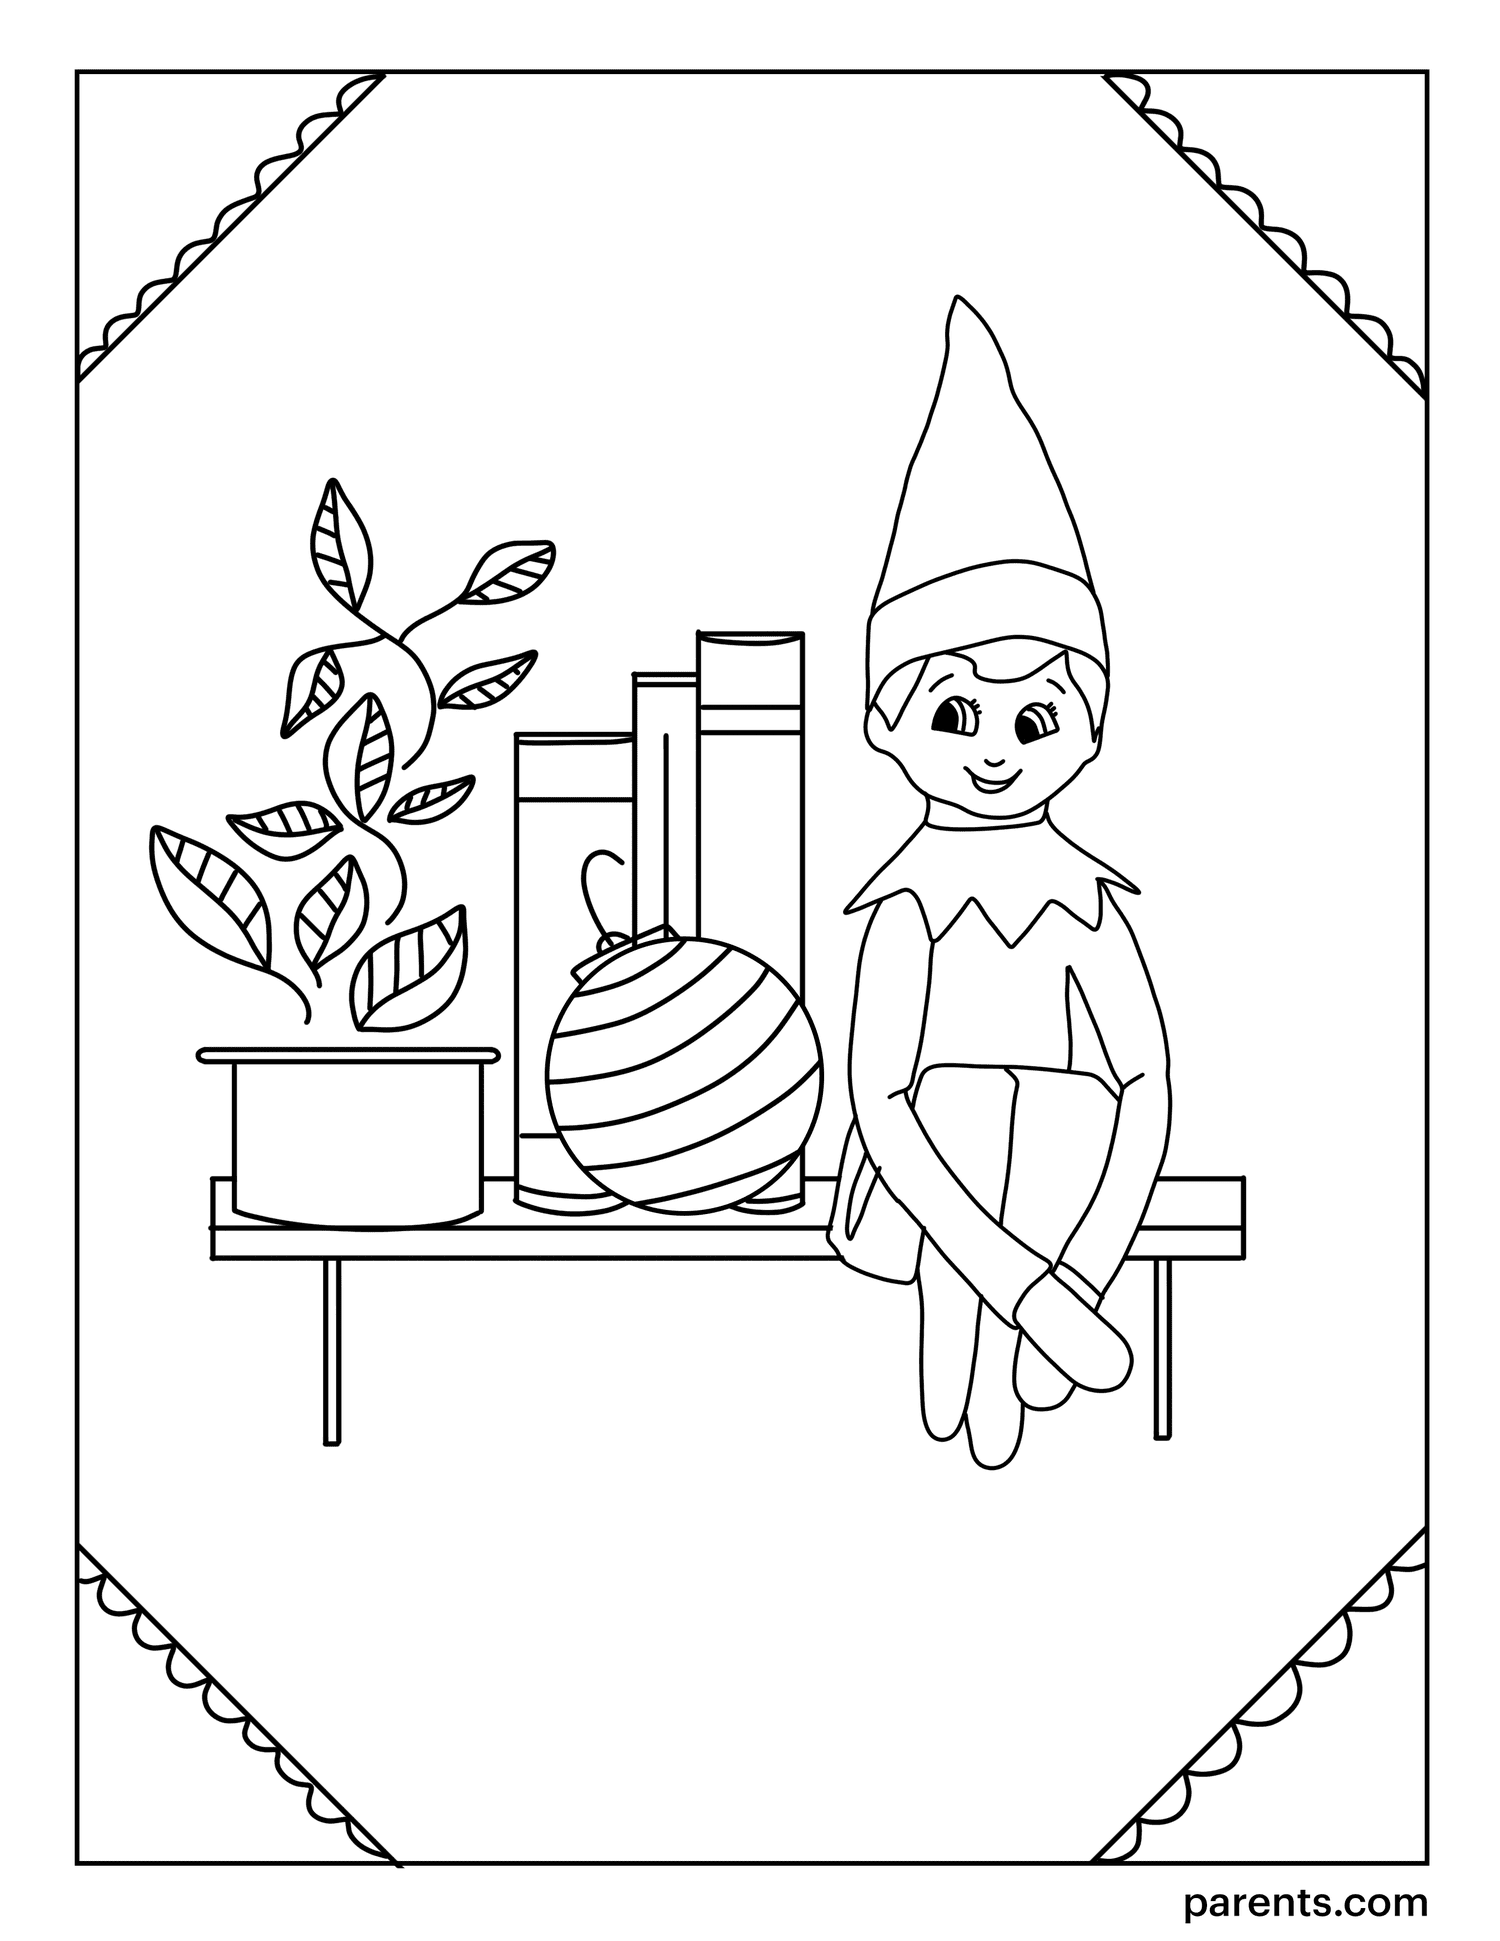 20 Elf on the Shelf Inspired Coloring Pages to Get Kids Excited for ...